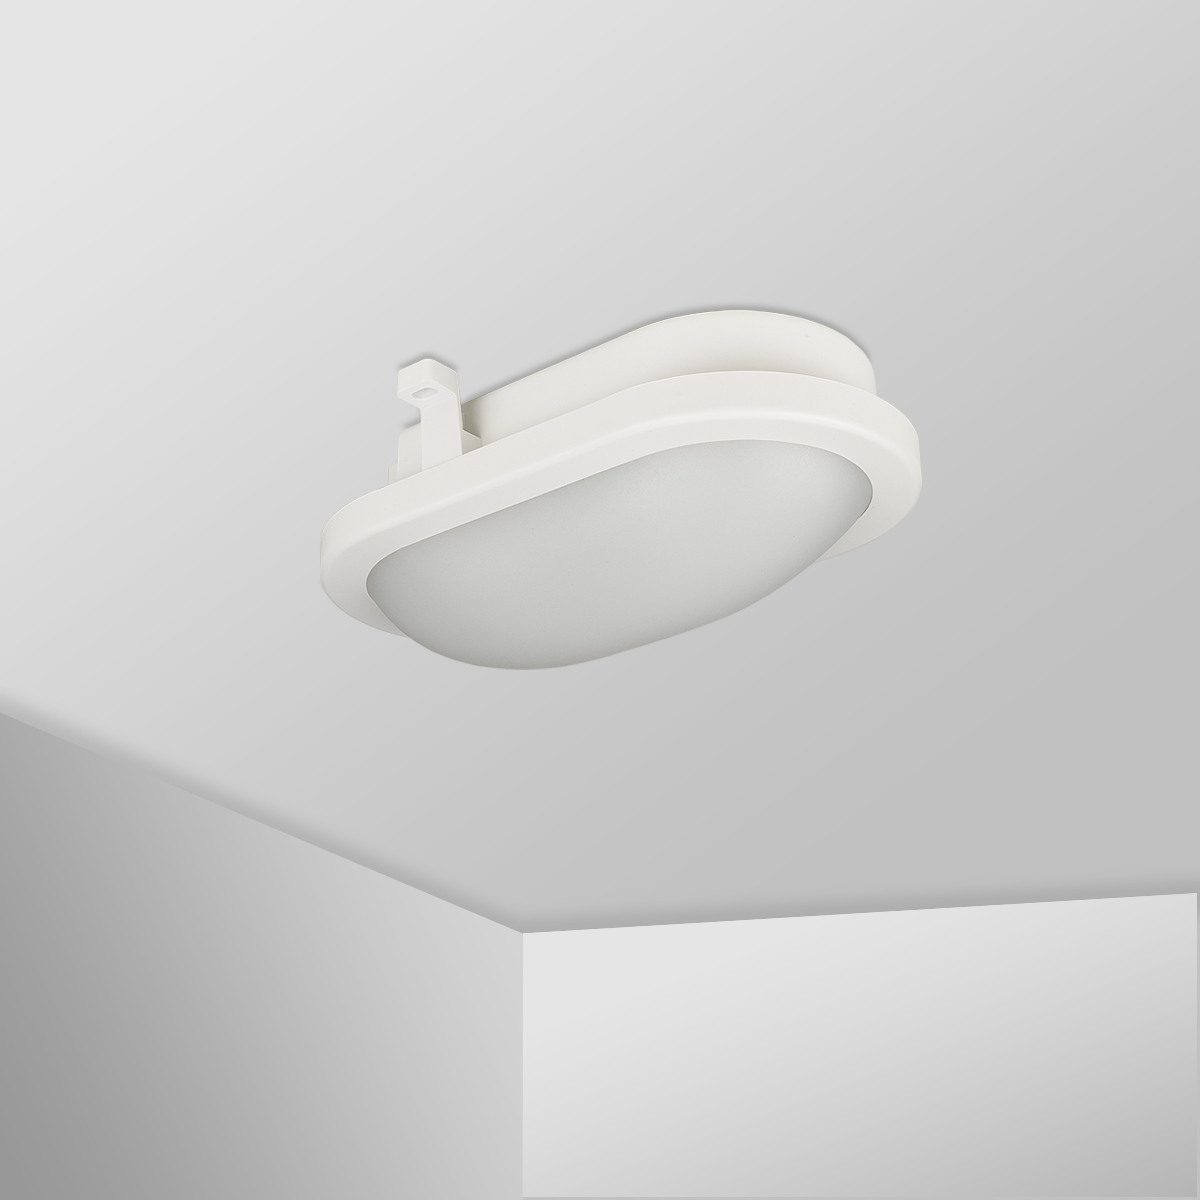 LED Feuchtraumleuchte 12W 840lm 5000K IP54